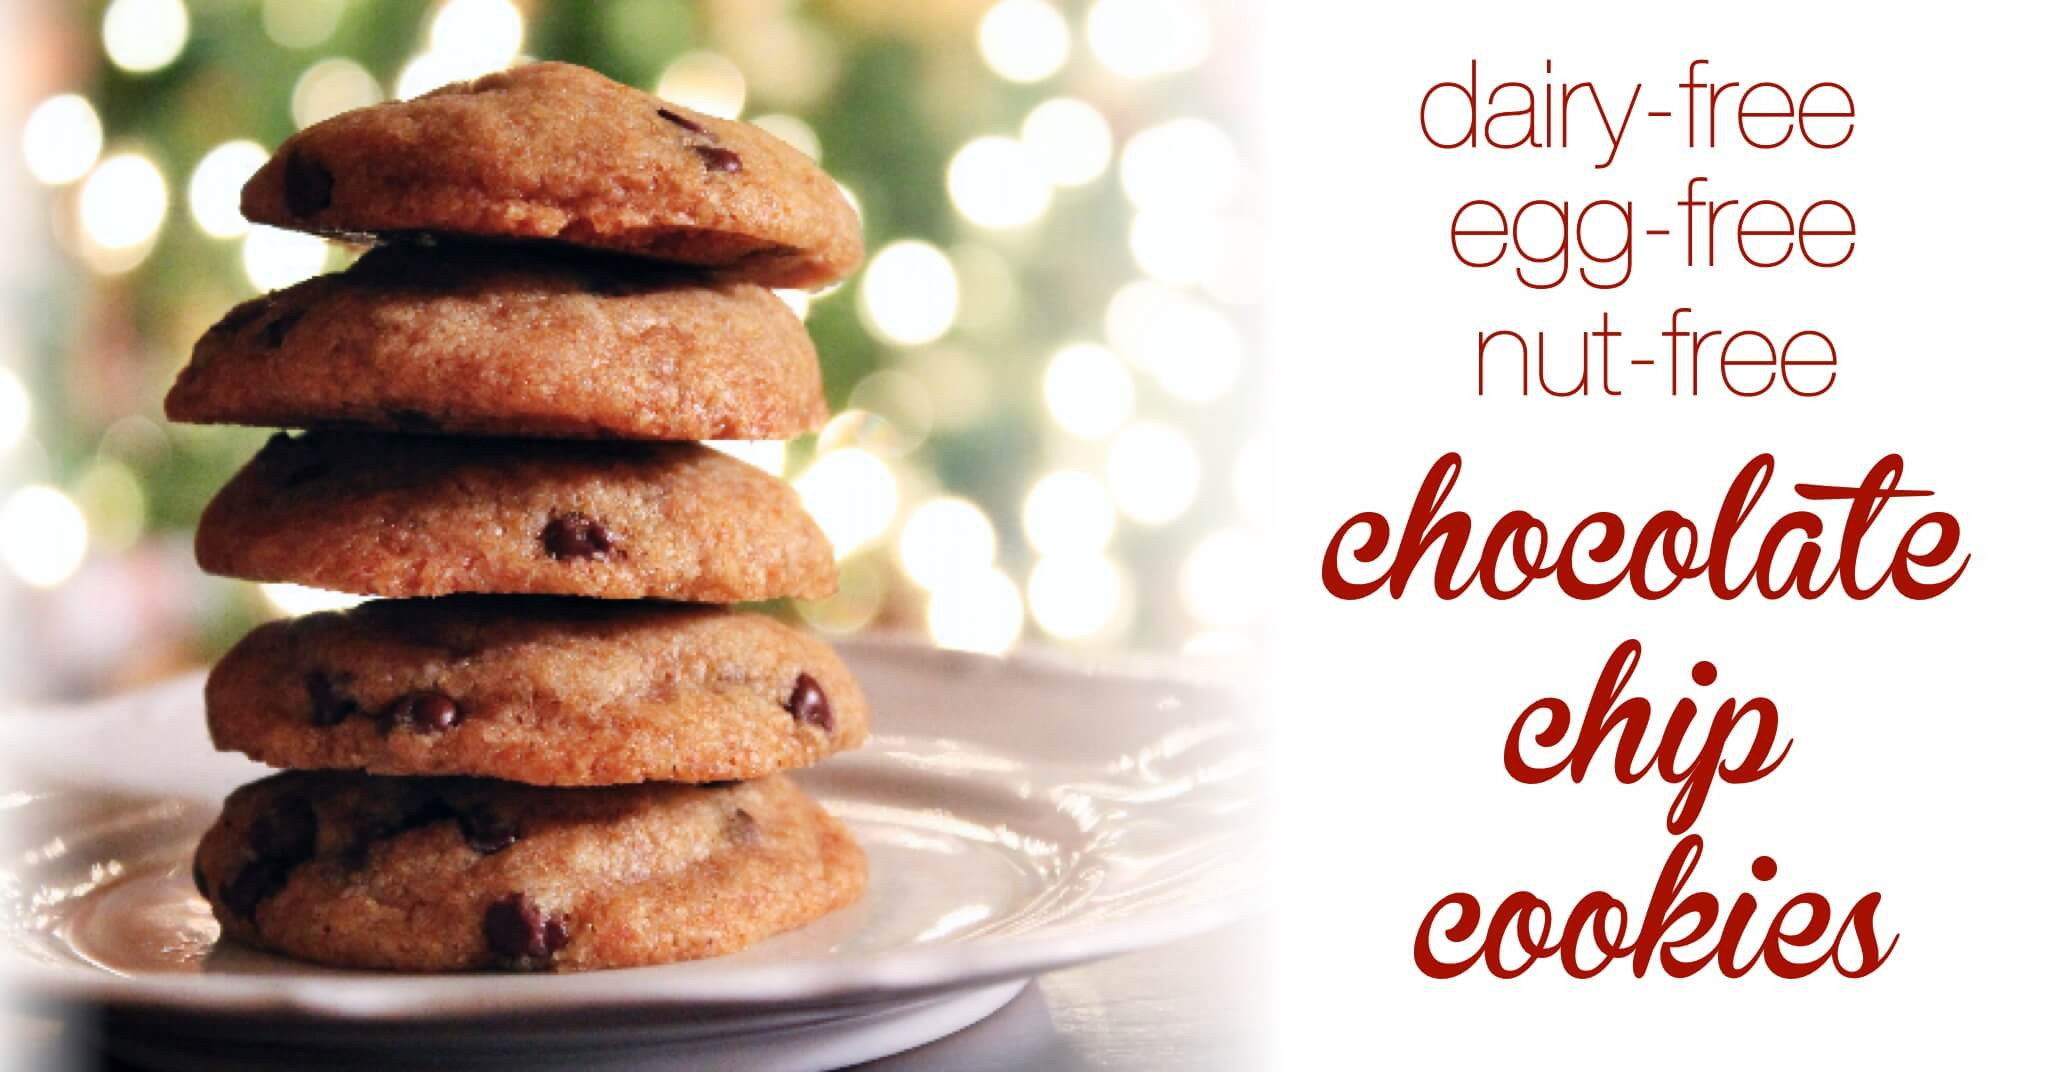 Dairy Free Egg Free Chocolate Chip Cookies
 Best Dairy Egg and Nut Free Chocolate Chip Cookies It